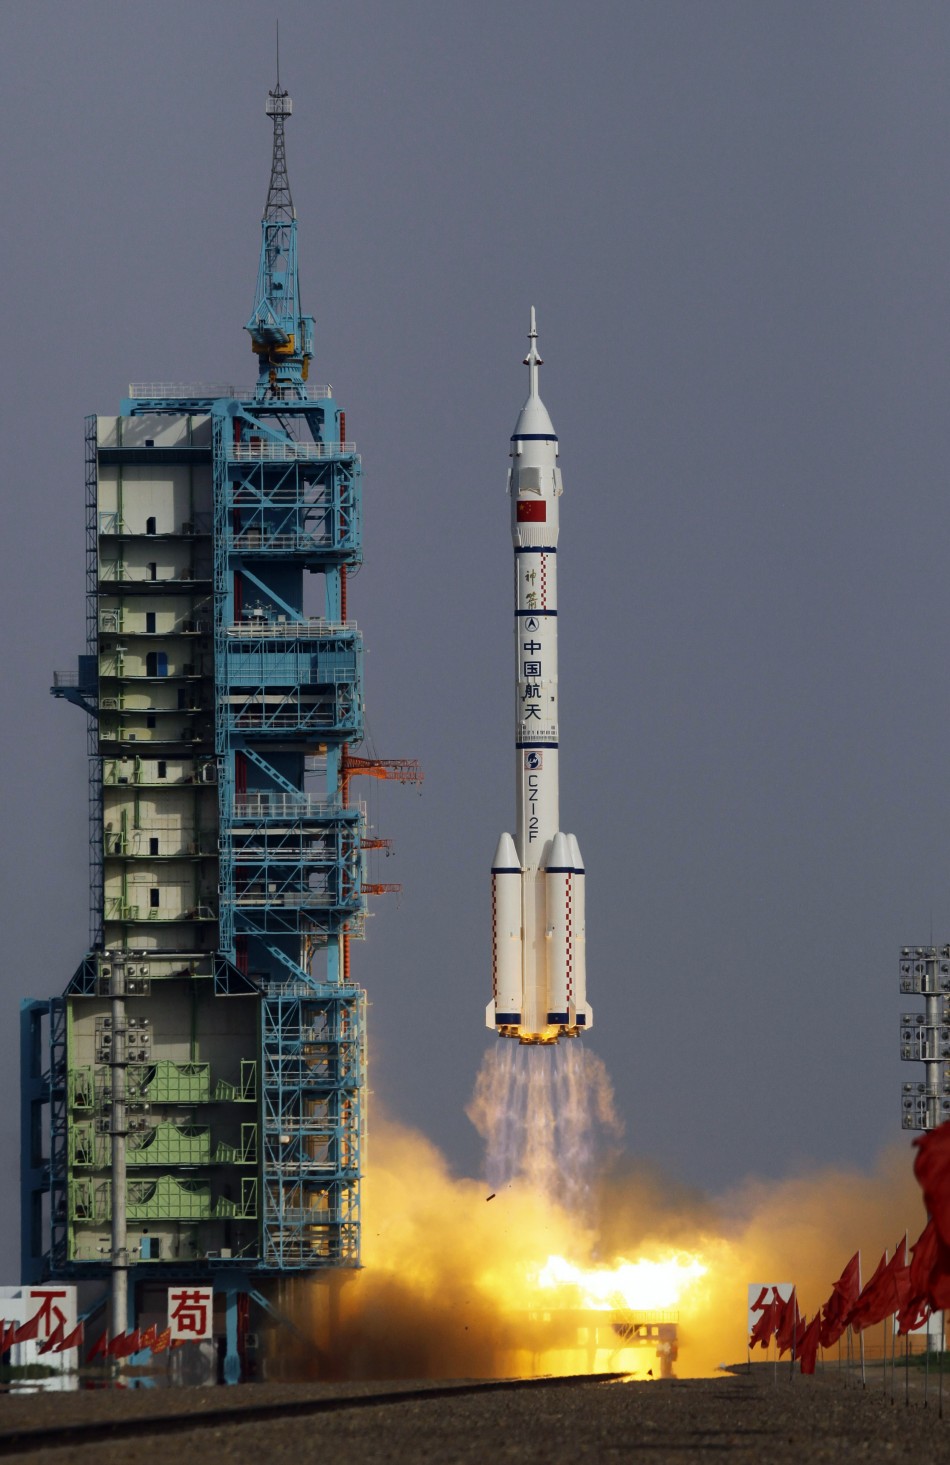 The Long March II-F rocket loaded with Shenzhou-9 manned spacecraft